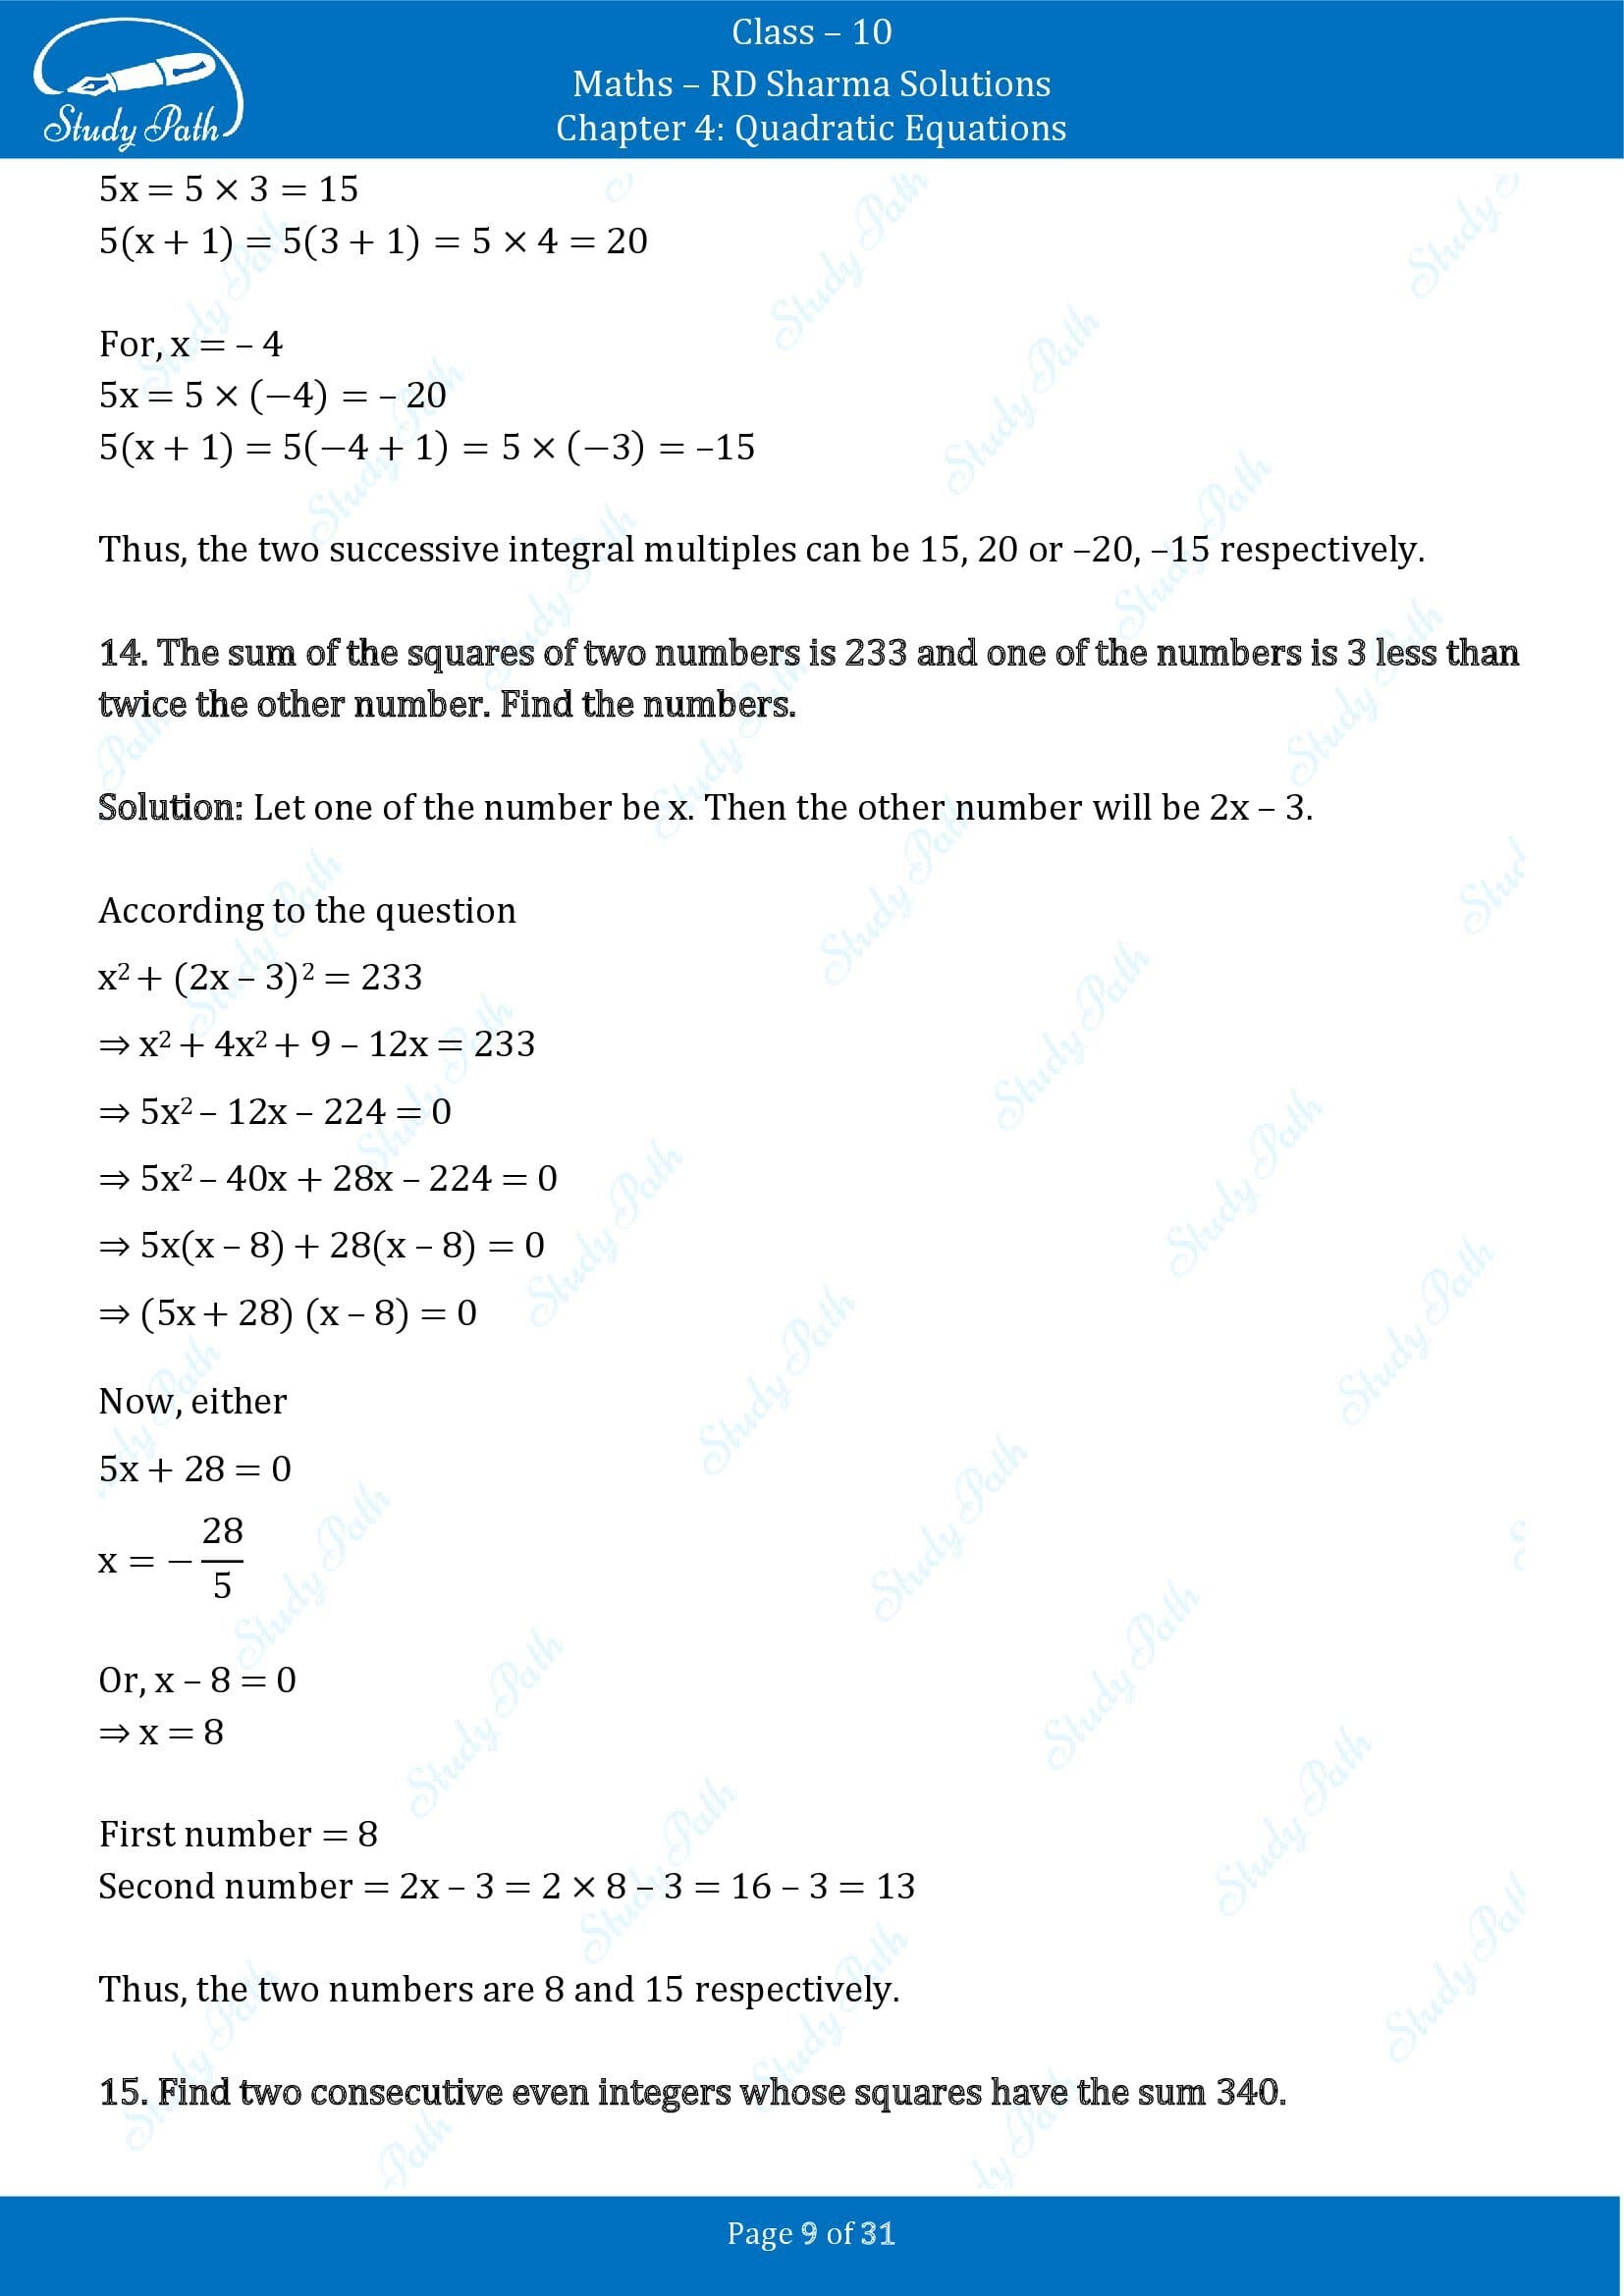 RD Sharma Solutions Class 10 Chapter 4 Quadratic Equations Exercise 4.7 00009